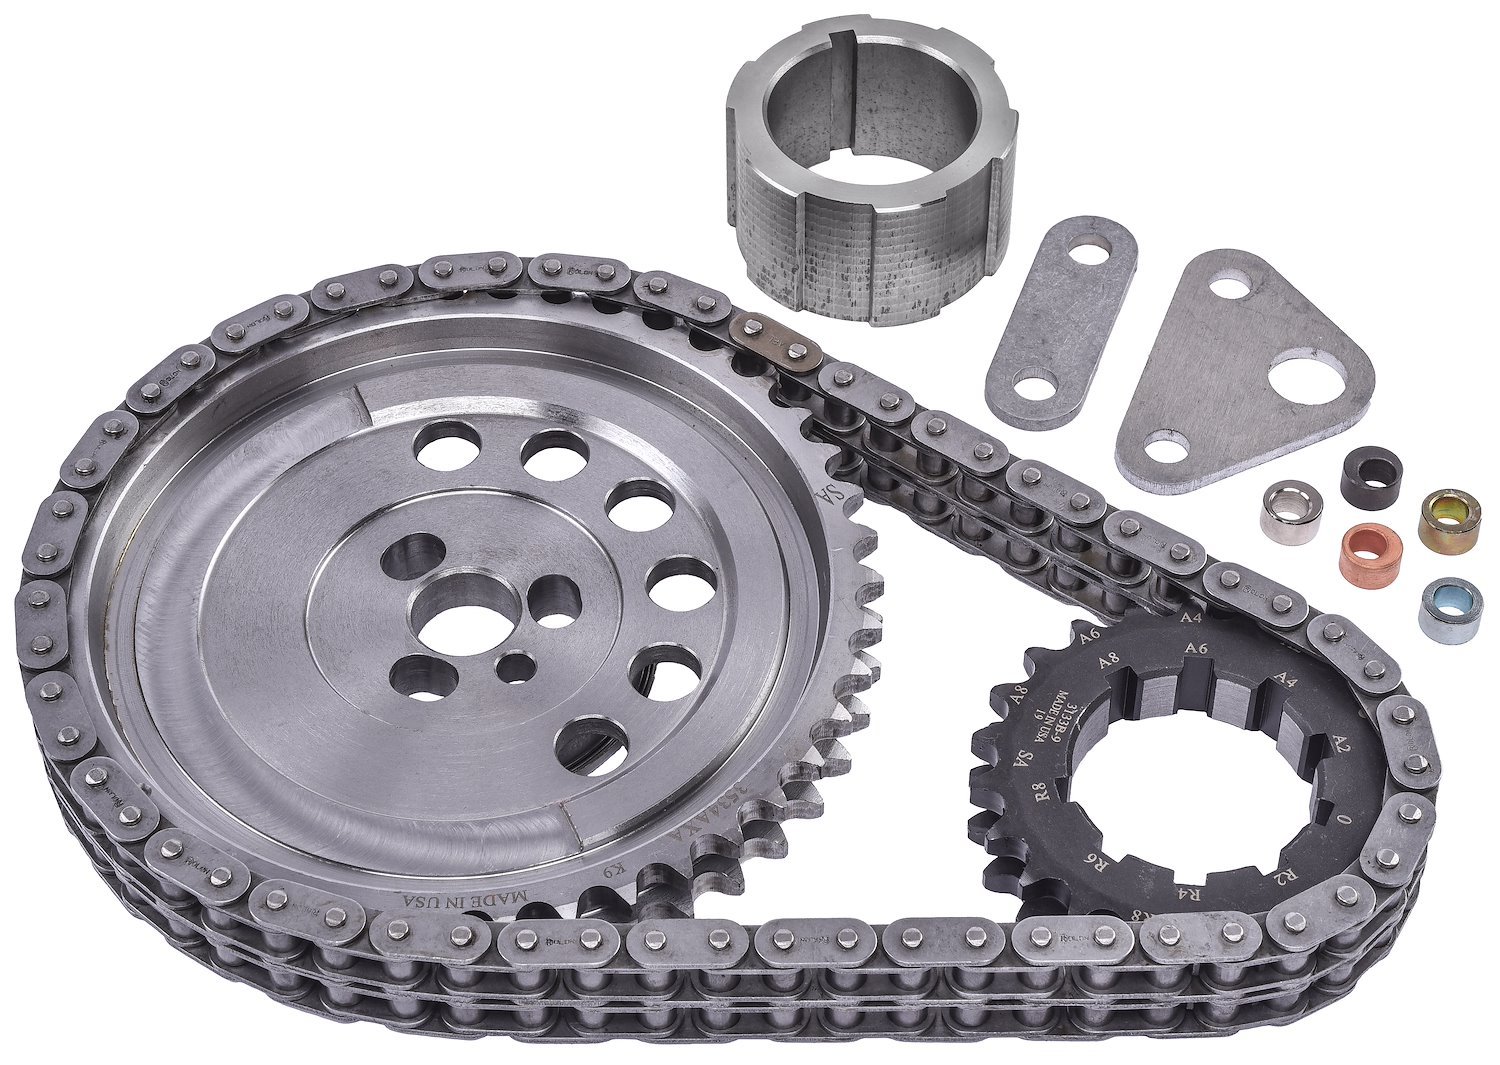 Billet Double Roller Timing Set for 4.8L, 5.3L, 5.7L and 6.0L GM LS-Series Engines